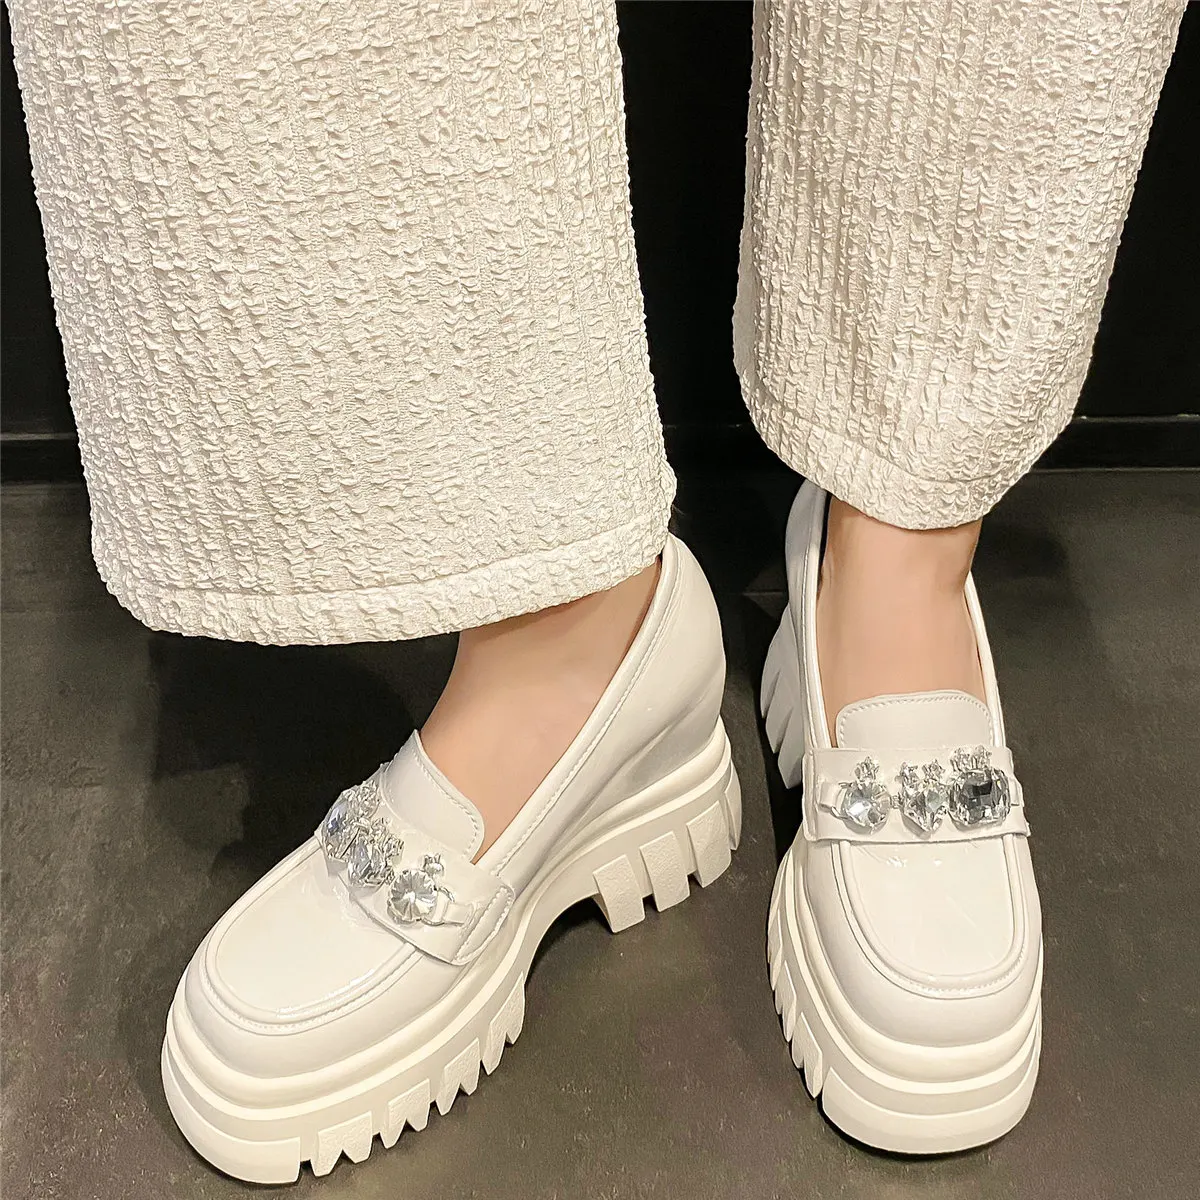 

Punk Goth Creepers Women Genuine Leather Wedges High Heel Platform Pumps Female Low Top Round Toe Fashion Sneakers Casual Shoes